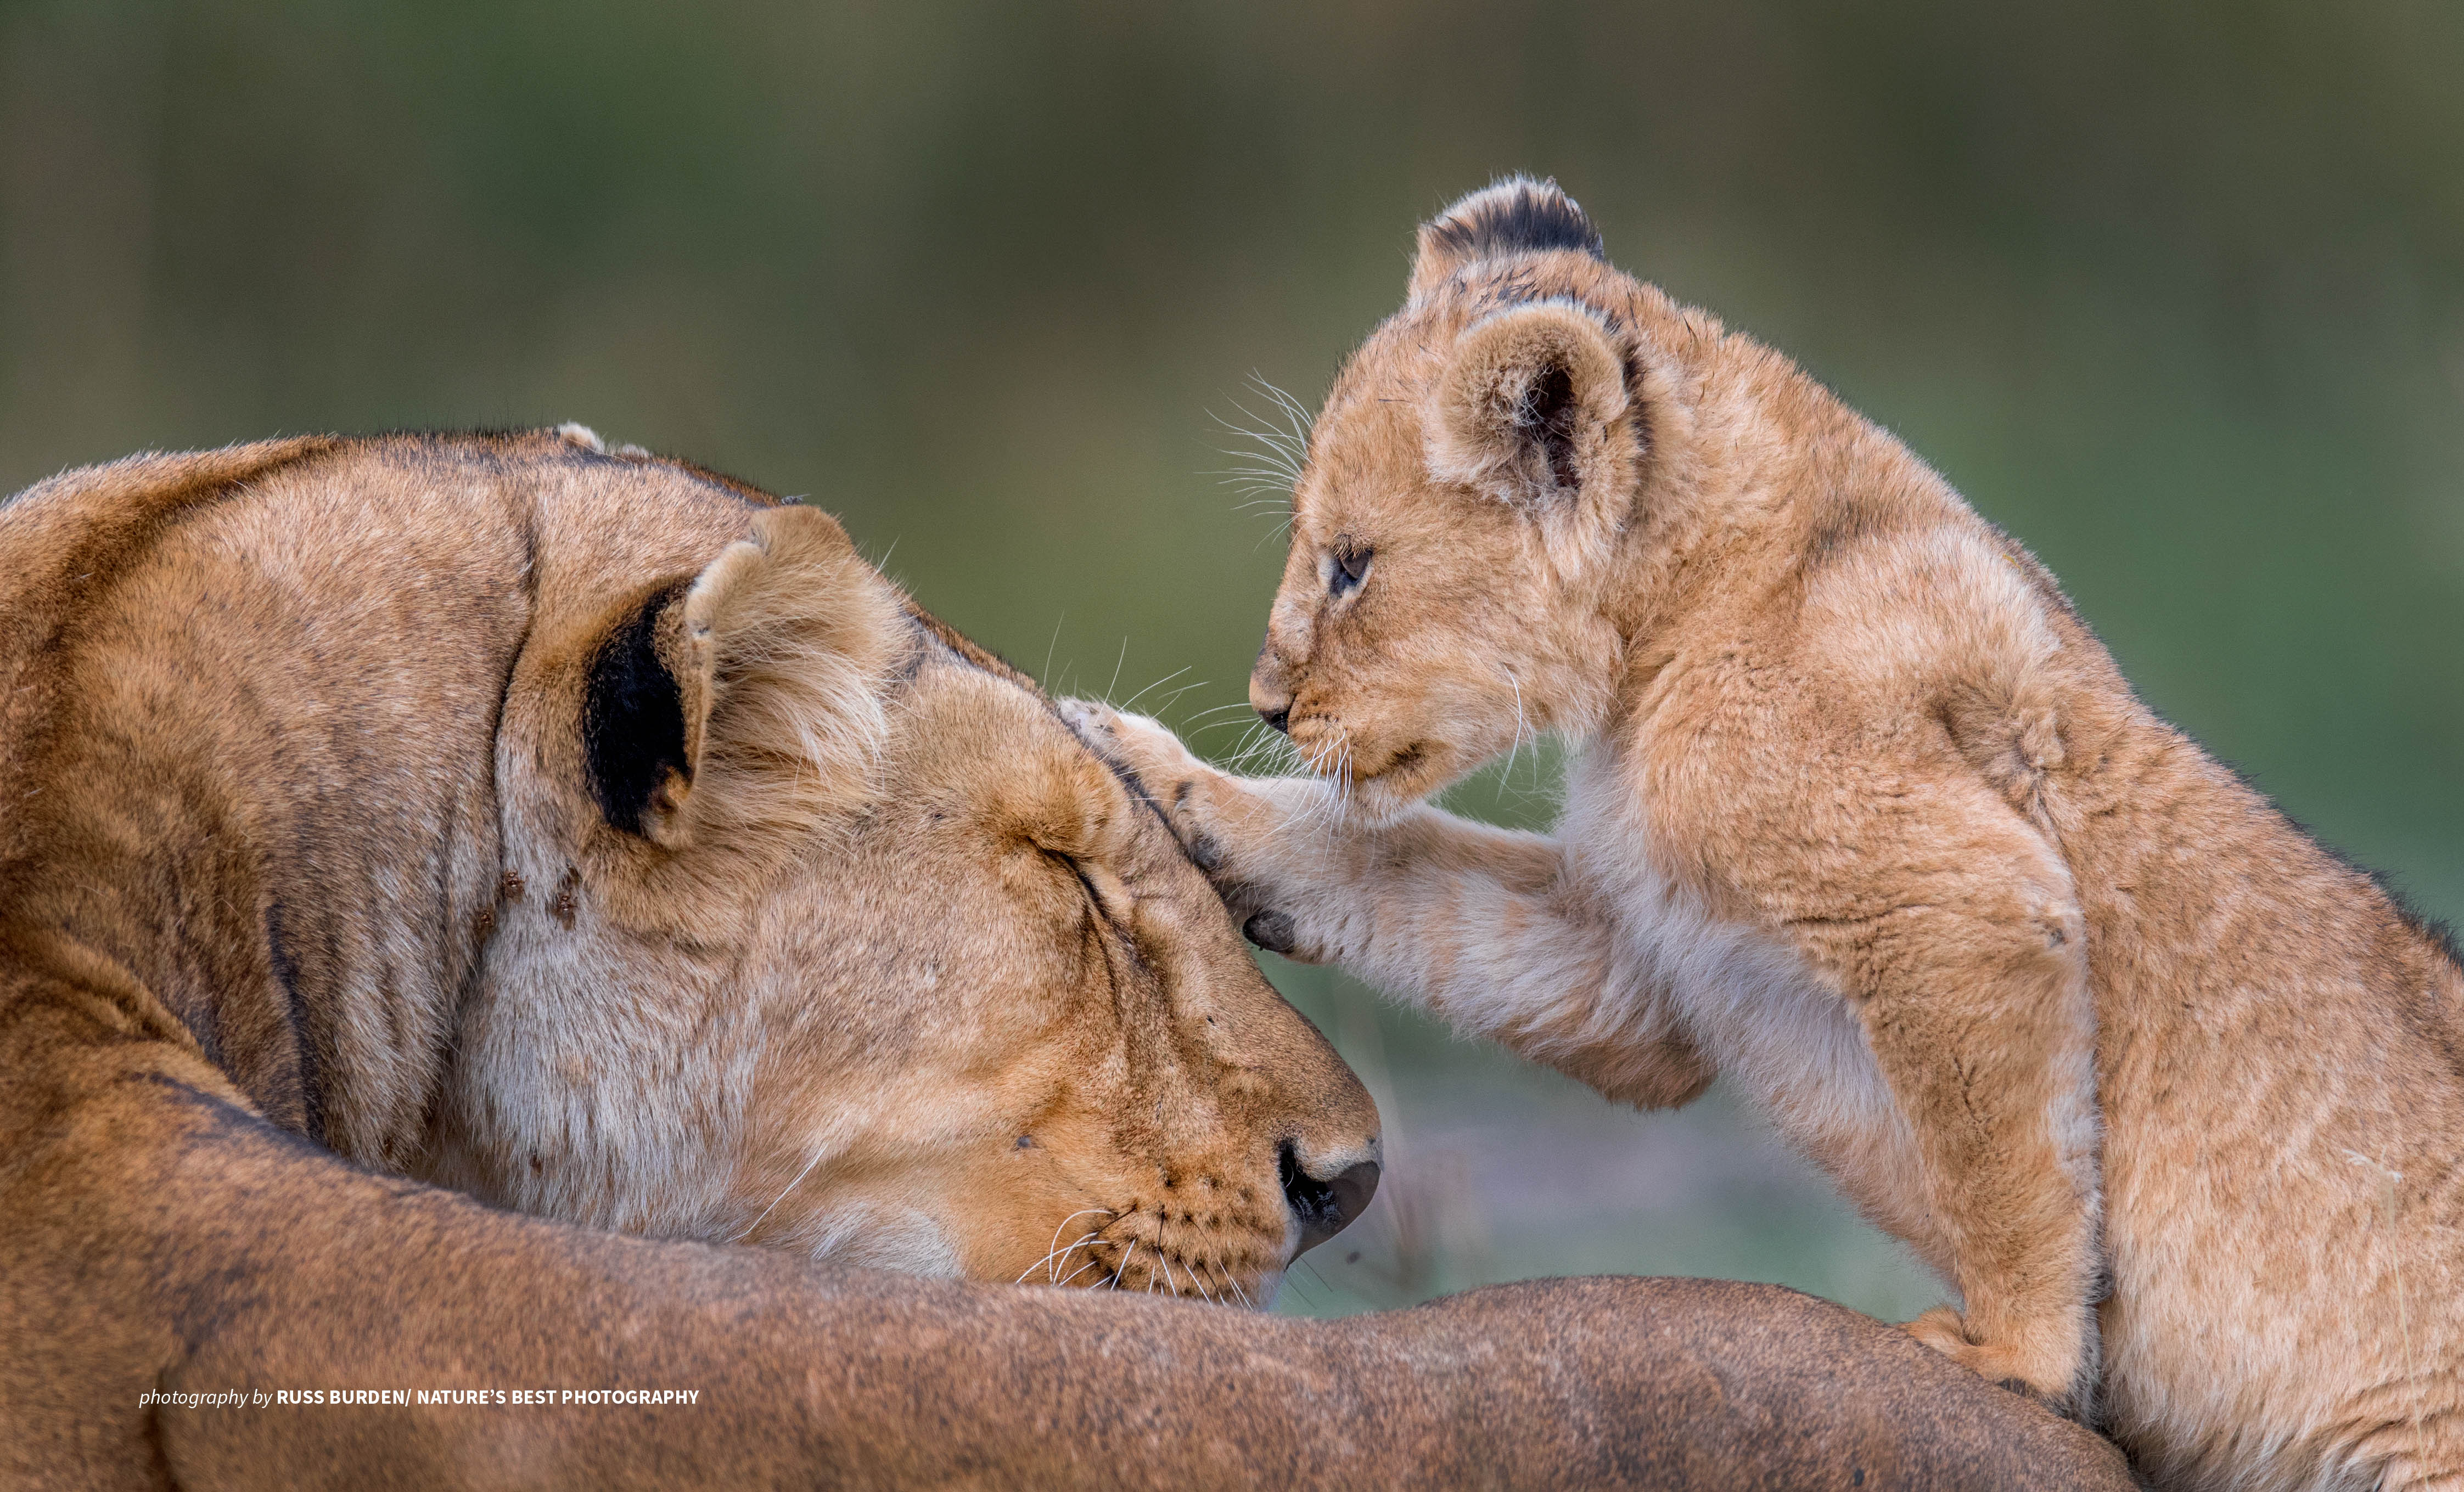 Photo of a reclining lion cub patting a lioness on the head.